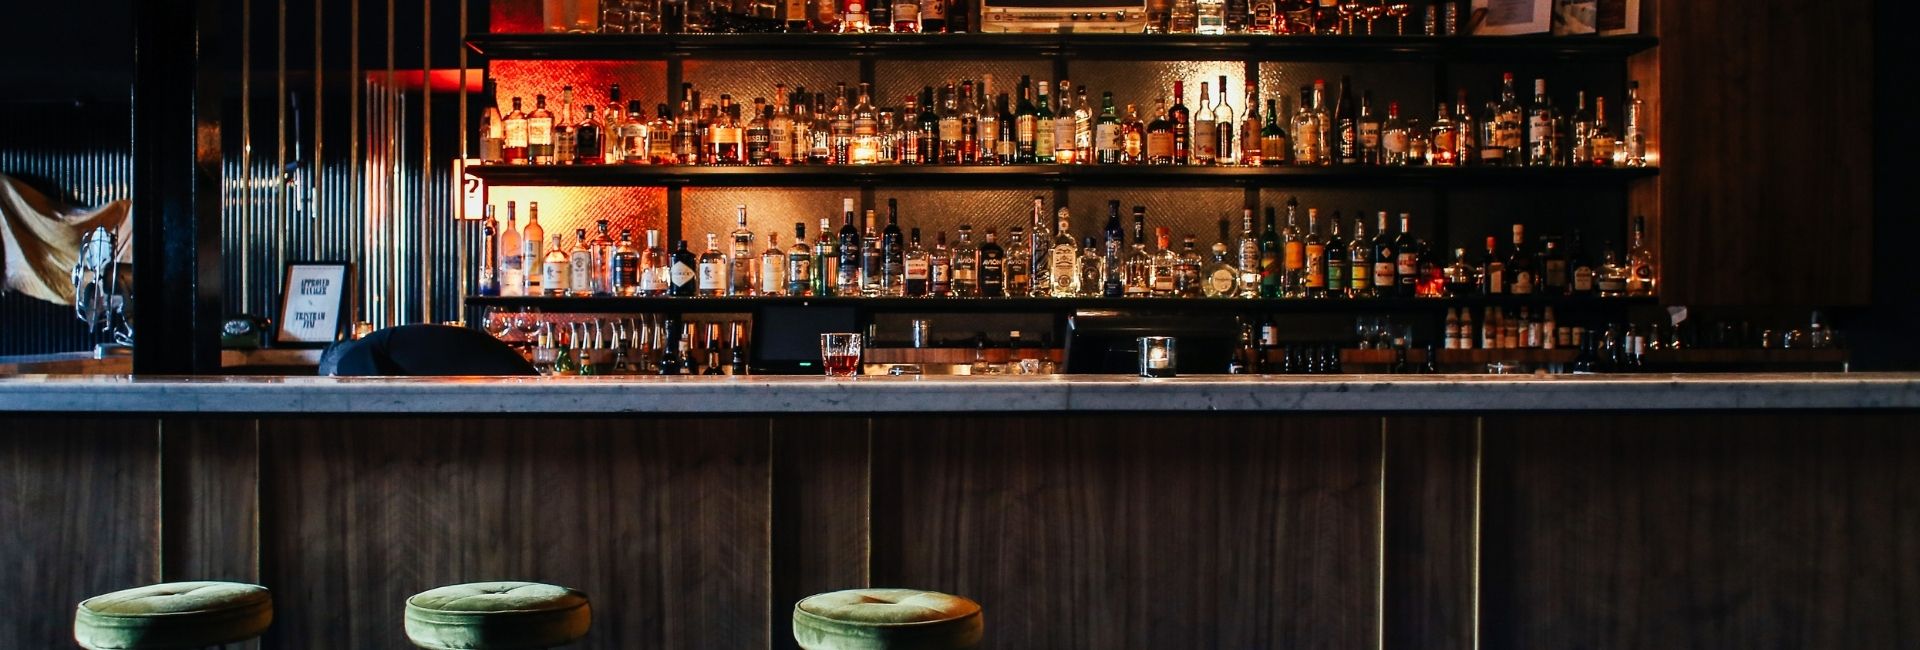 How to order whiskey at a bar?